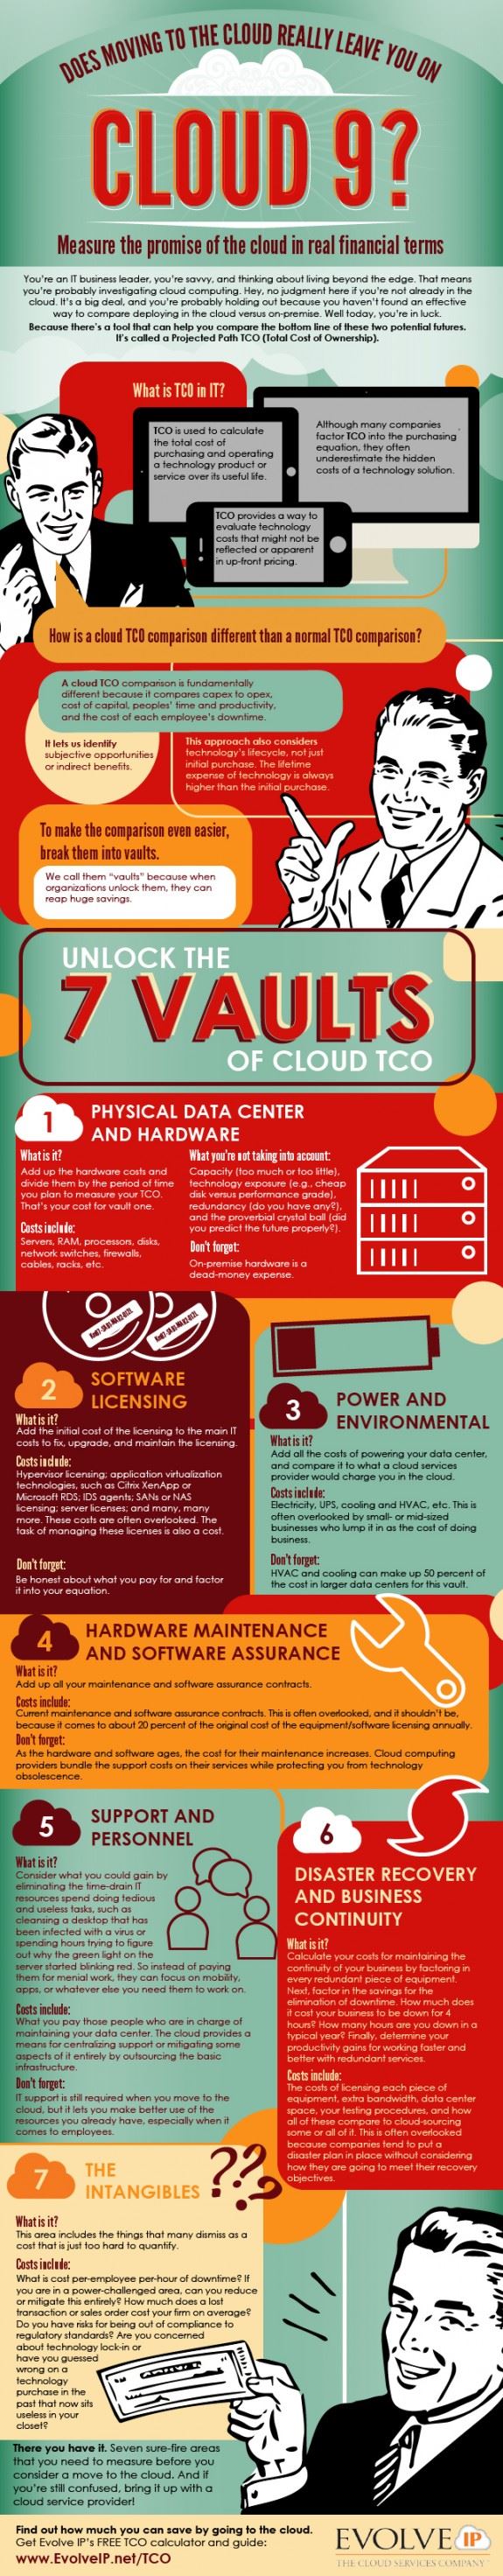 INFOGRAPHIC: Does Moving to the Cloud Really Leave You On Cloud 9?